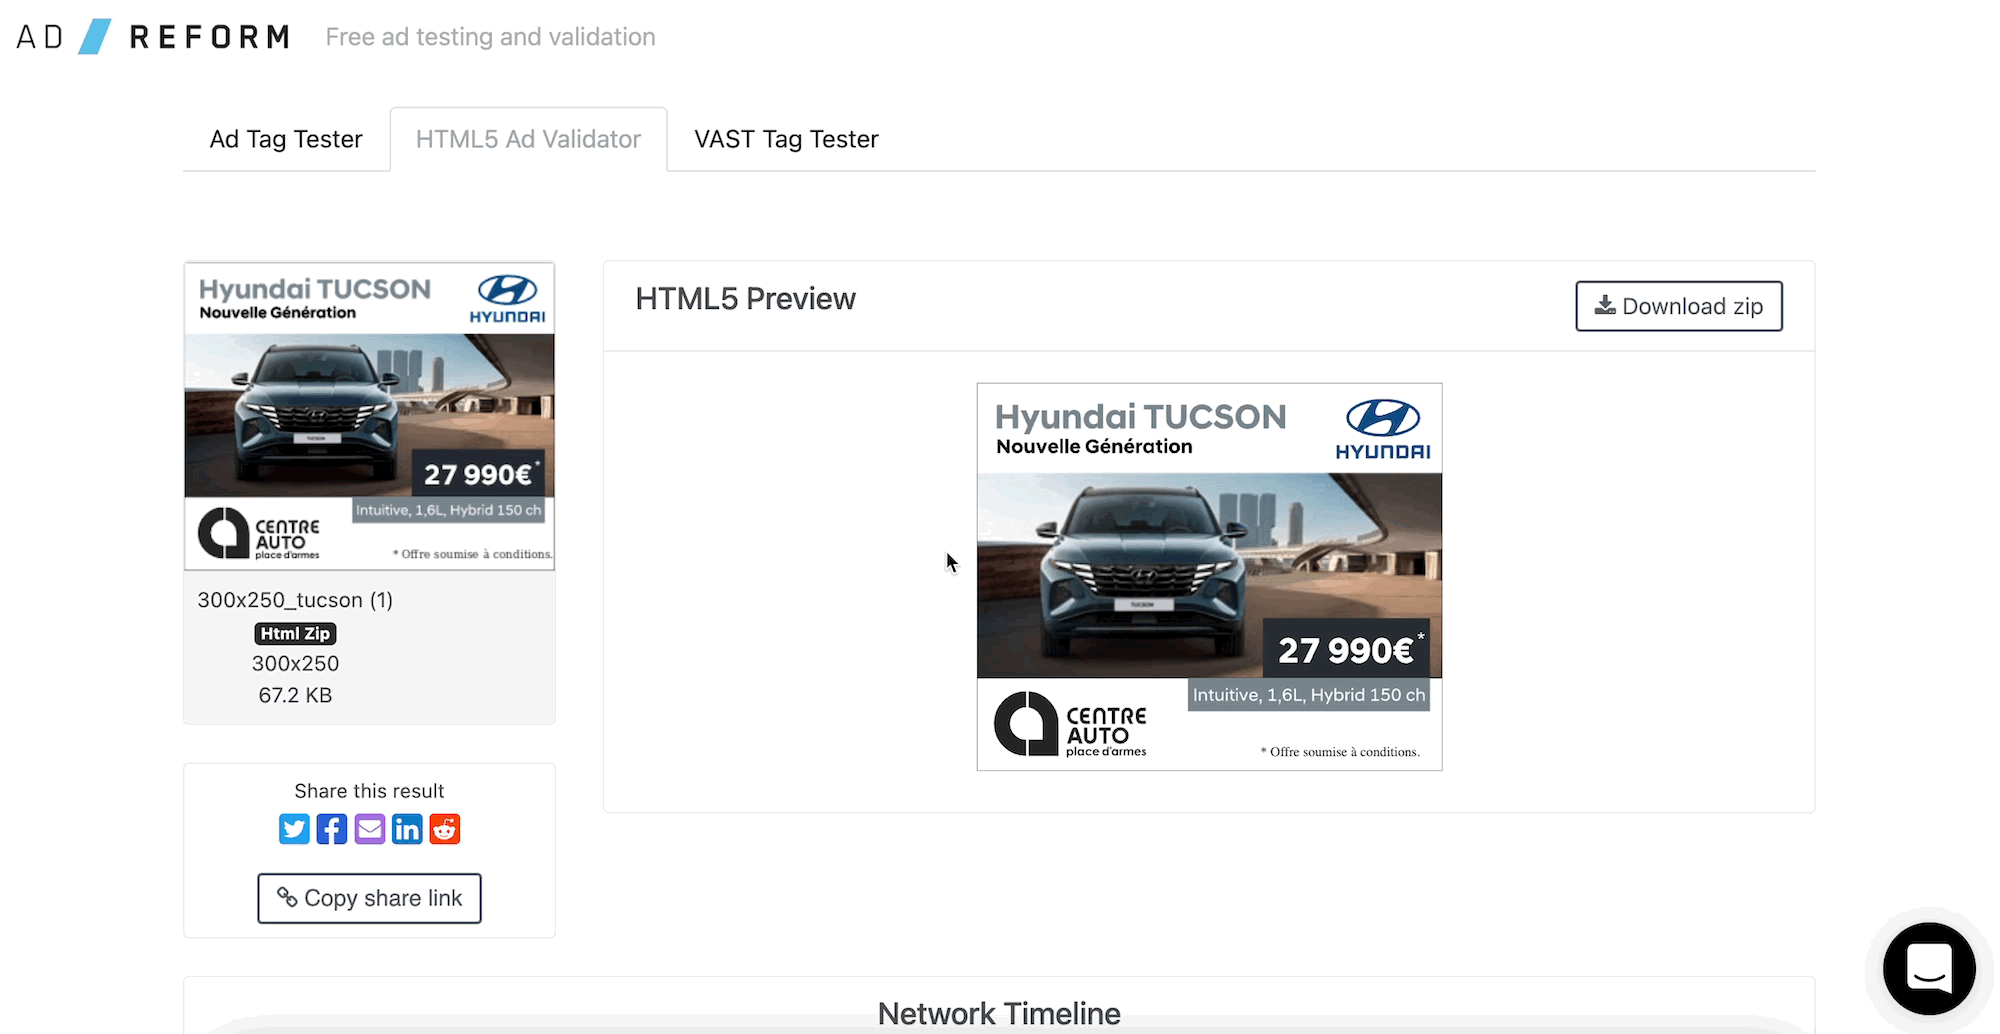 HTML5 ad preview on Previewads.com